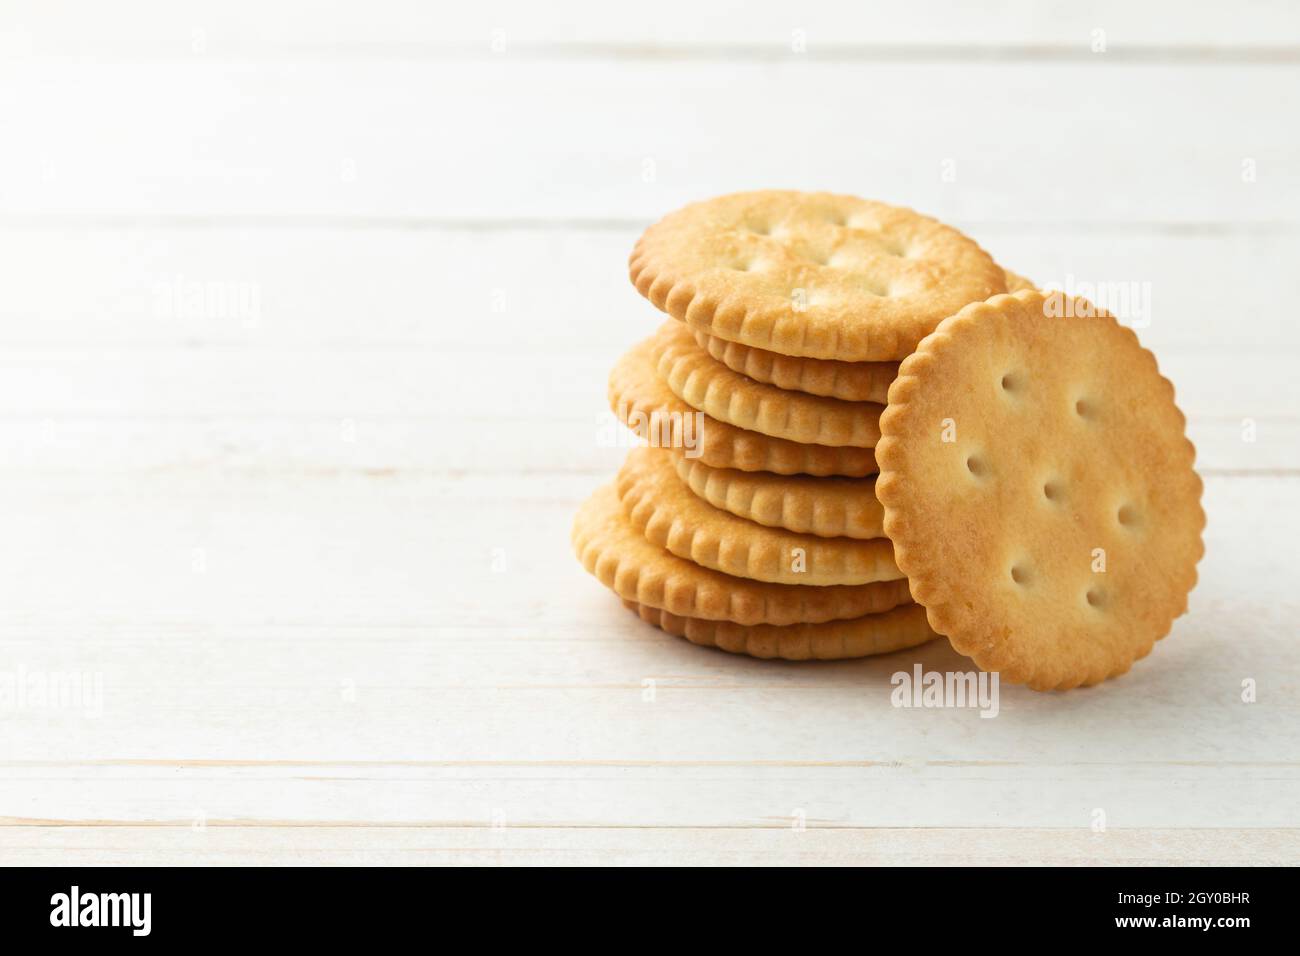 Rounded Cracker cookies on white wooden table background. Stock Photo